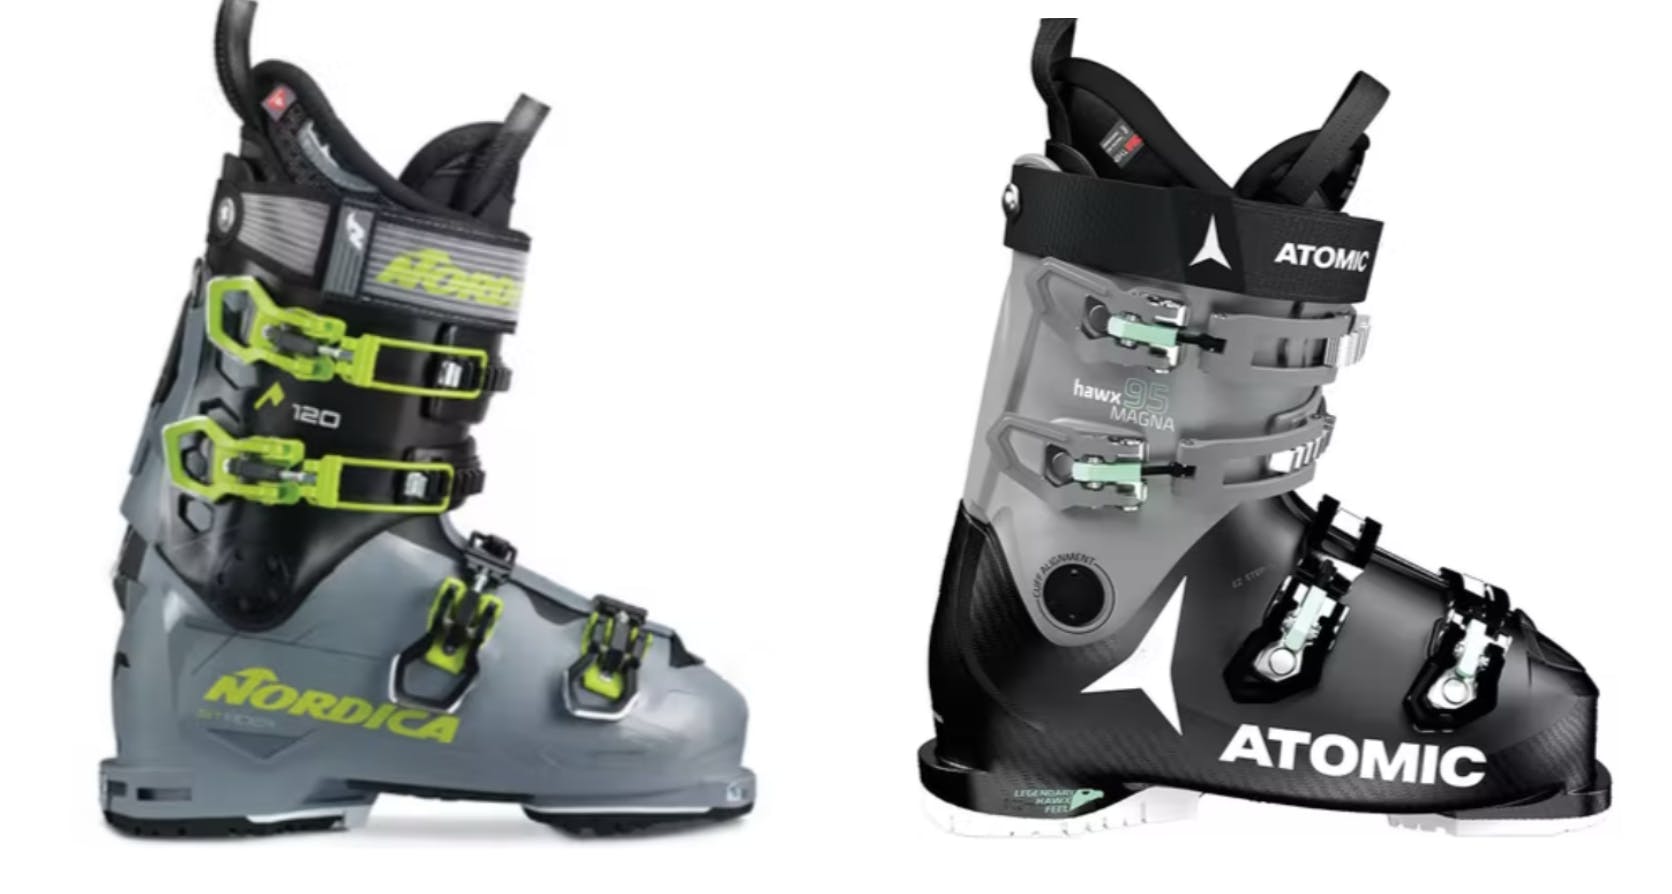 Two boots, the Men's Nordica 120 Strider boot  on the left and the Women's Atomic Hawx Magna 95 on the right.